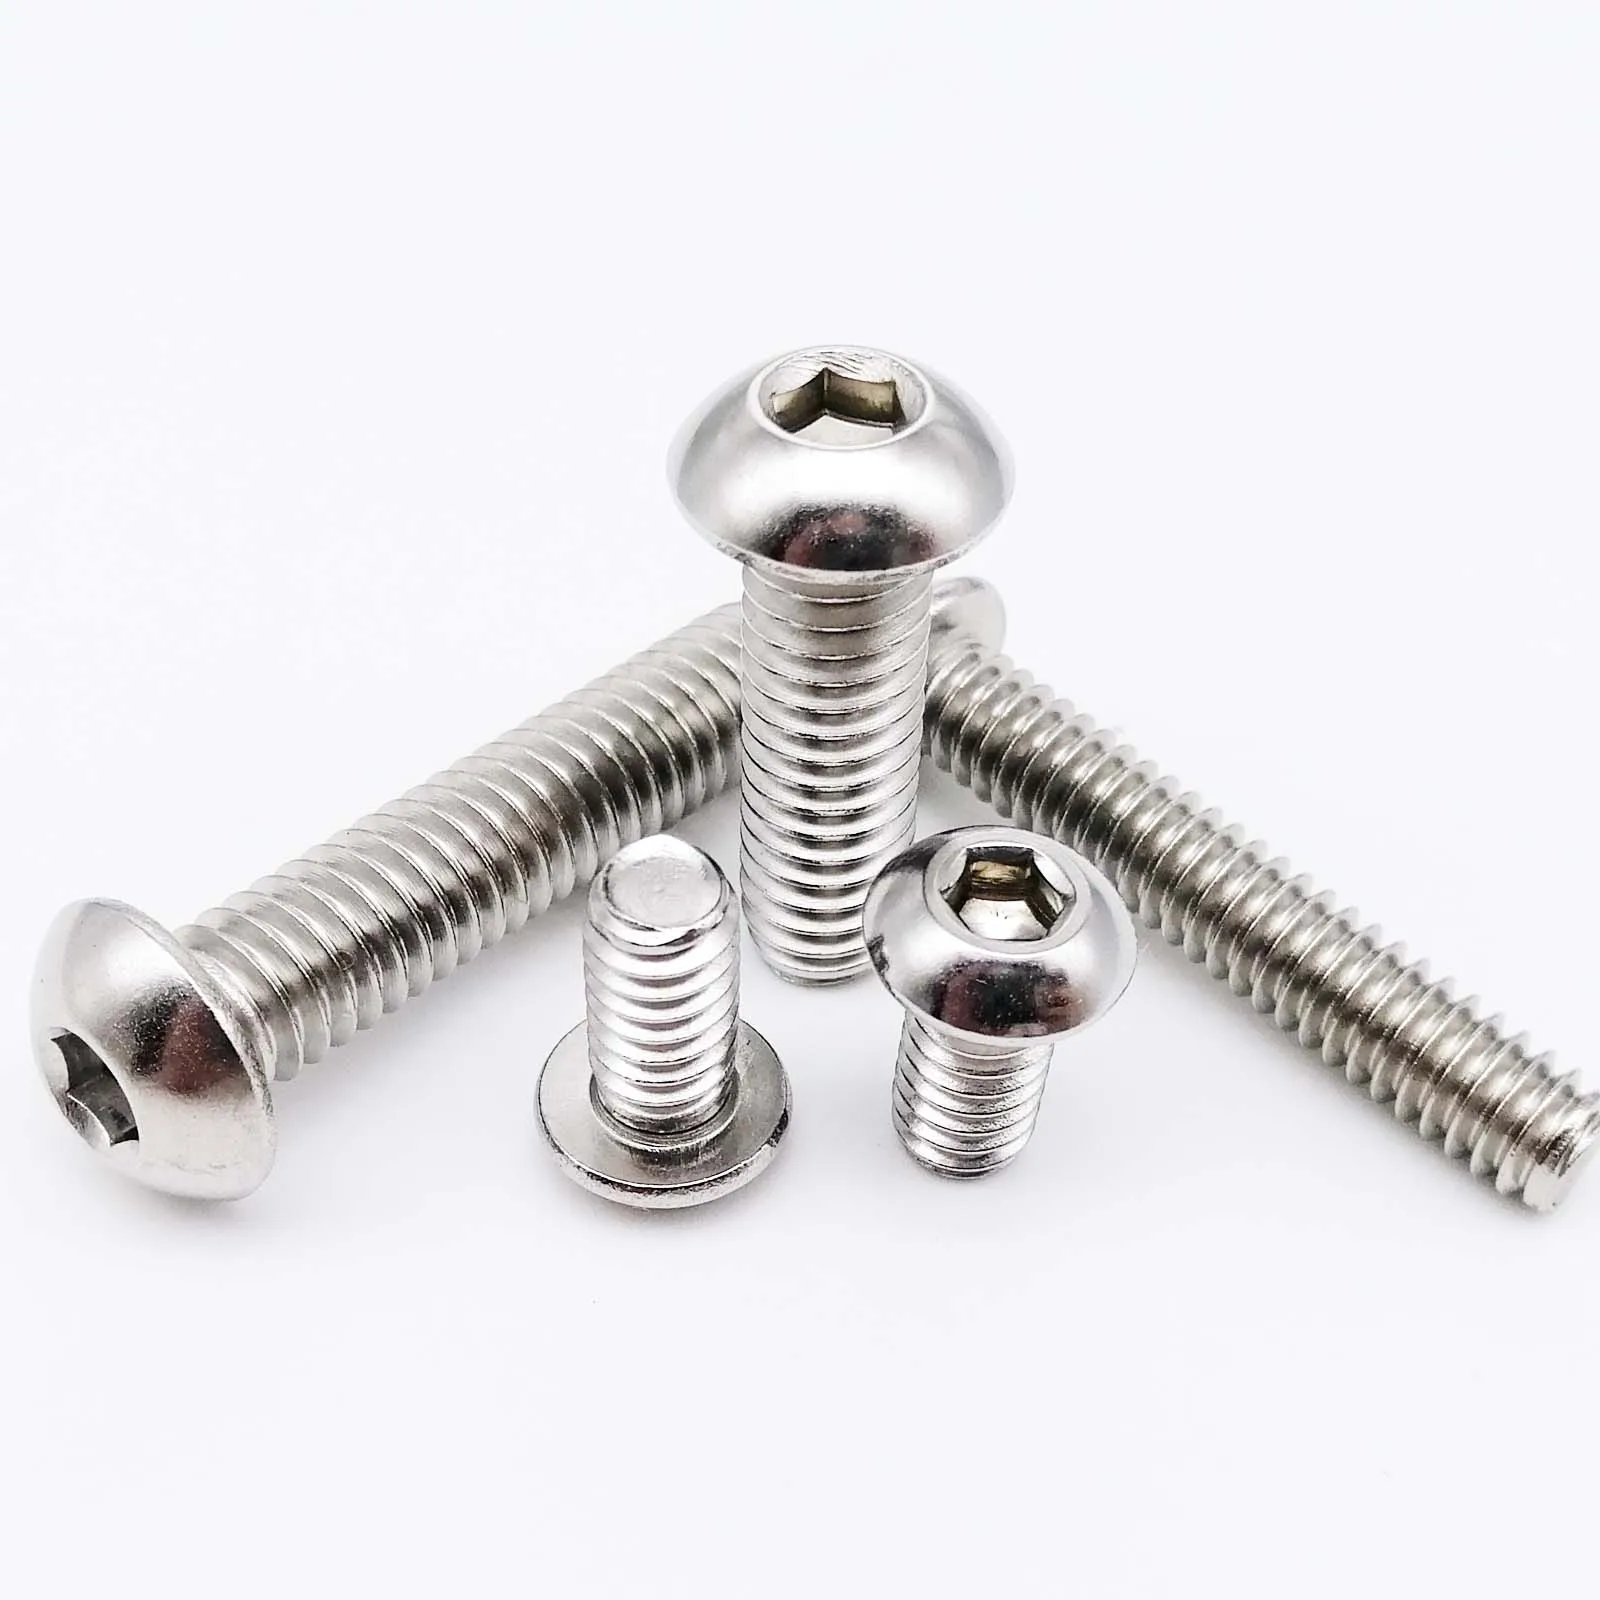 UNC A2 STAINLESS SOCKET CAPS BOLTS SCREWS HARLEY 10-32" 4-40" 6-32" 8-32" 1/4" 